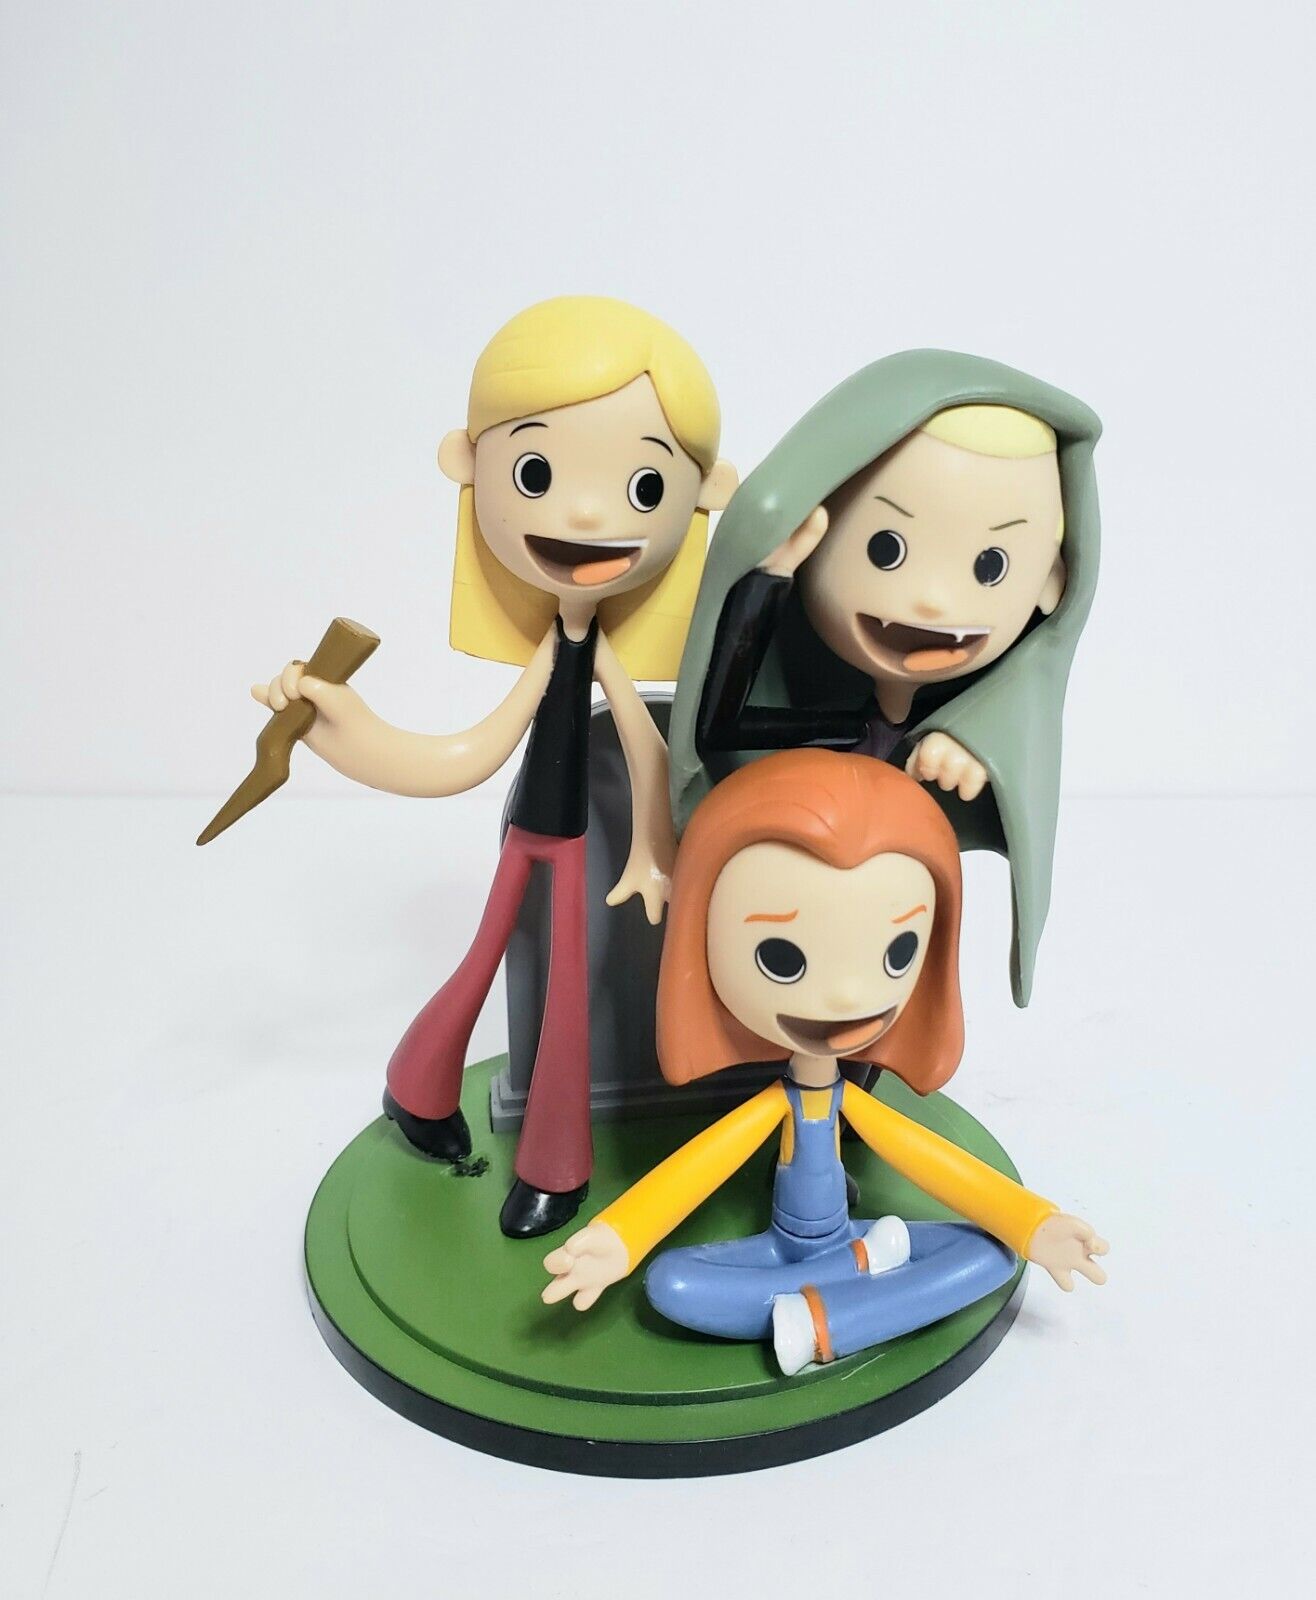 BUFFY THE VAMPIRE SLAYER ARTIST SERIES "BUFFY AND FRIENDS" LOOT CRATE